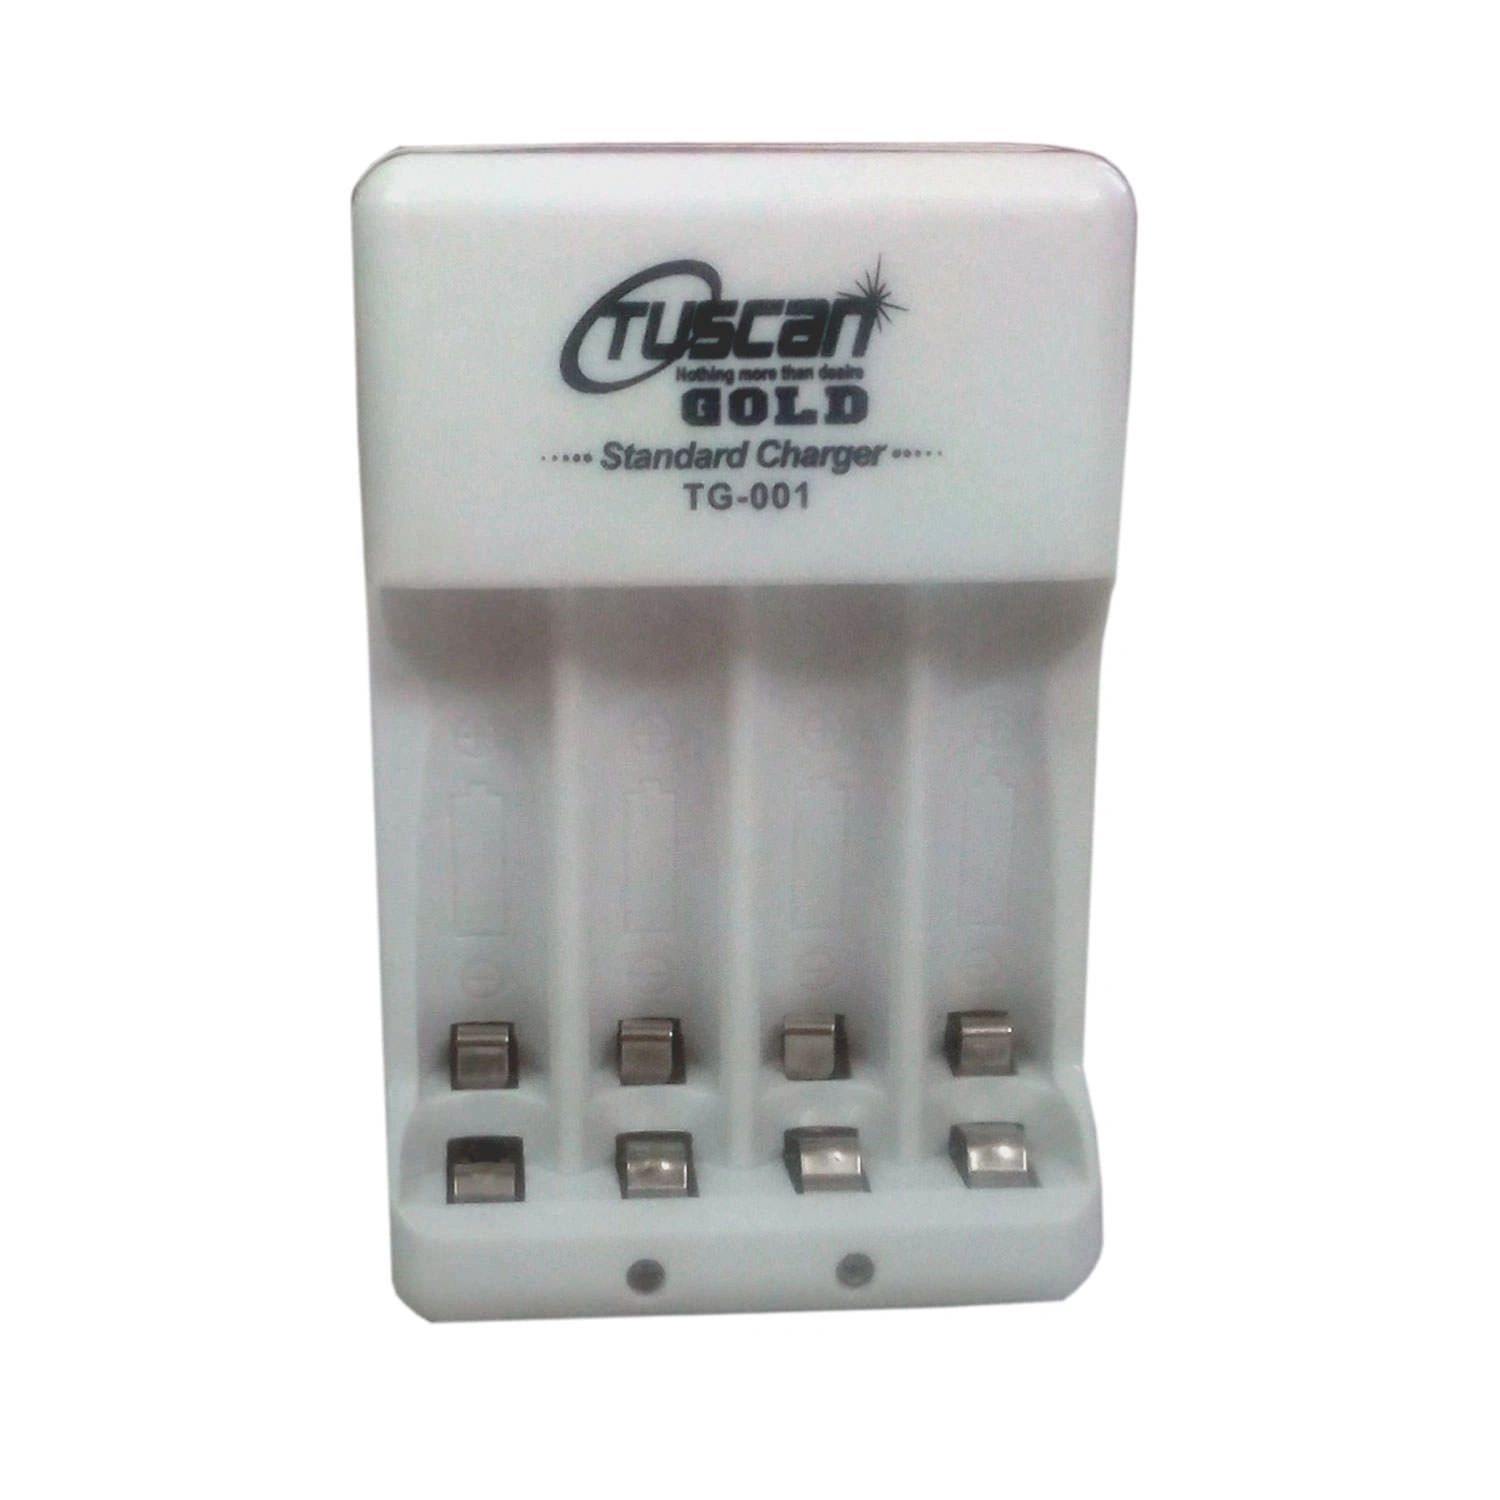 TUSCAN Gold Battery Charger for AA and AAA Rechargeable Batteries TG-001-Rechargeable Batteries-dealsplant